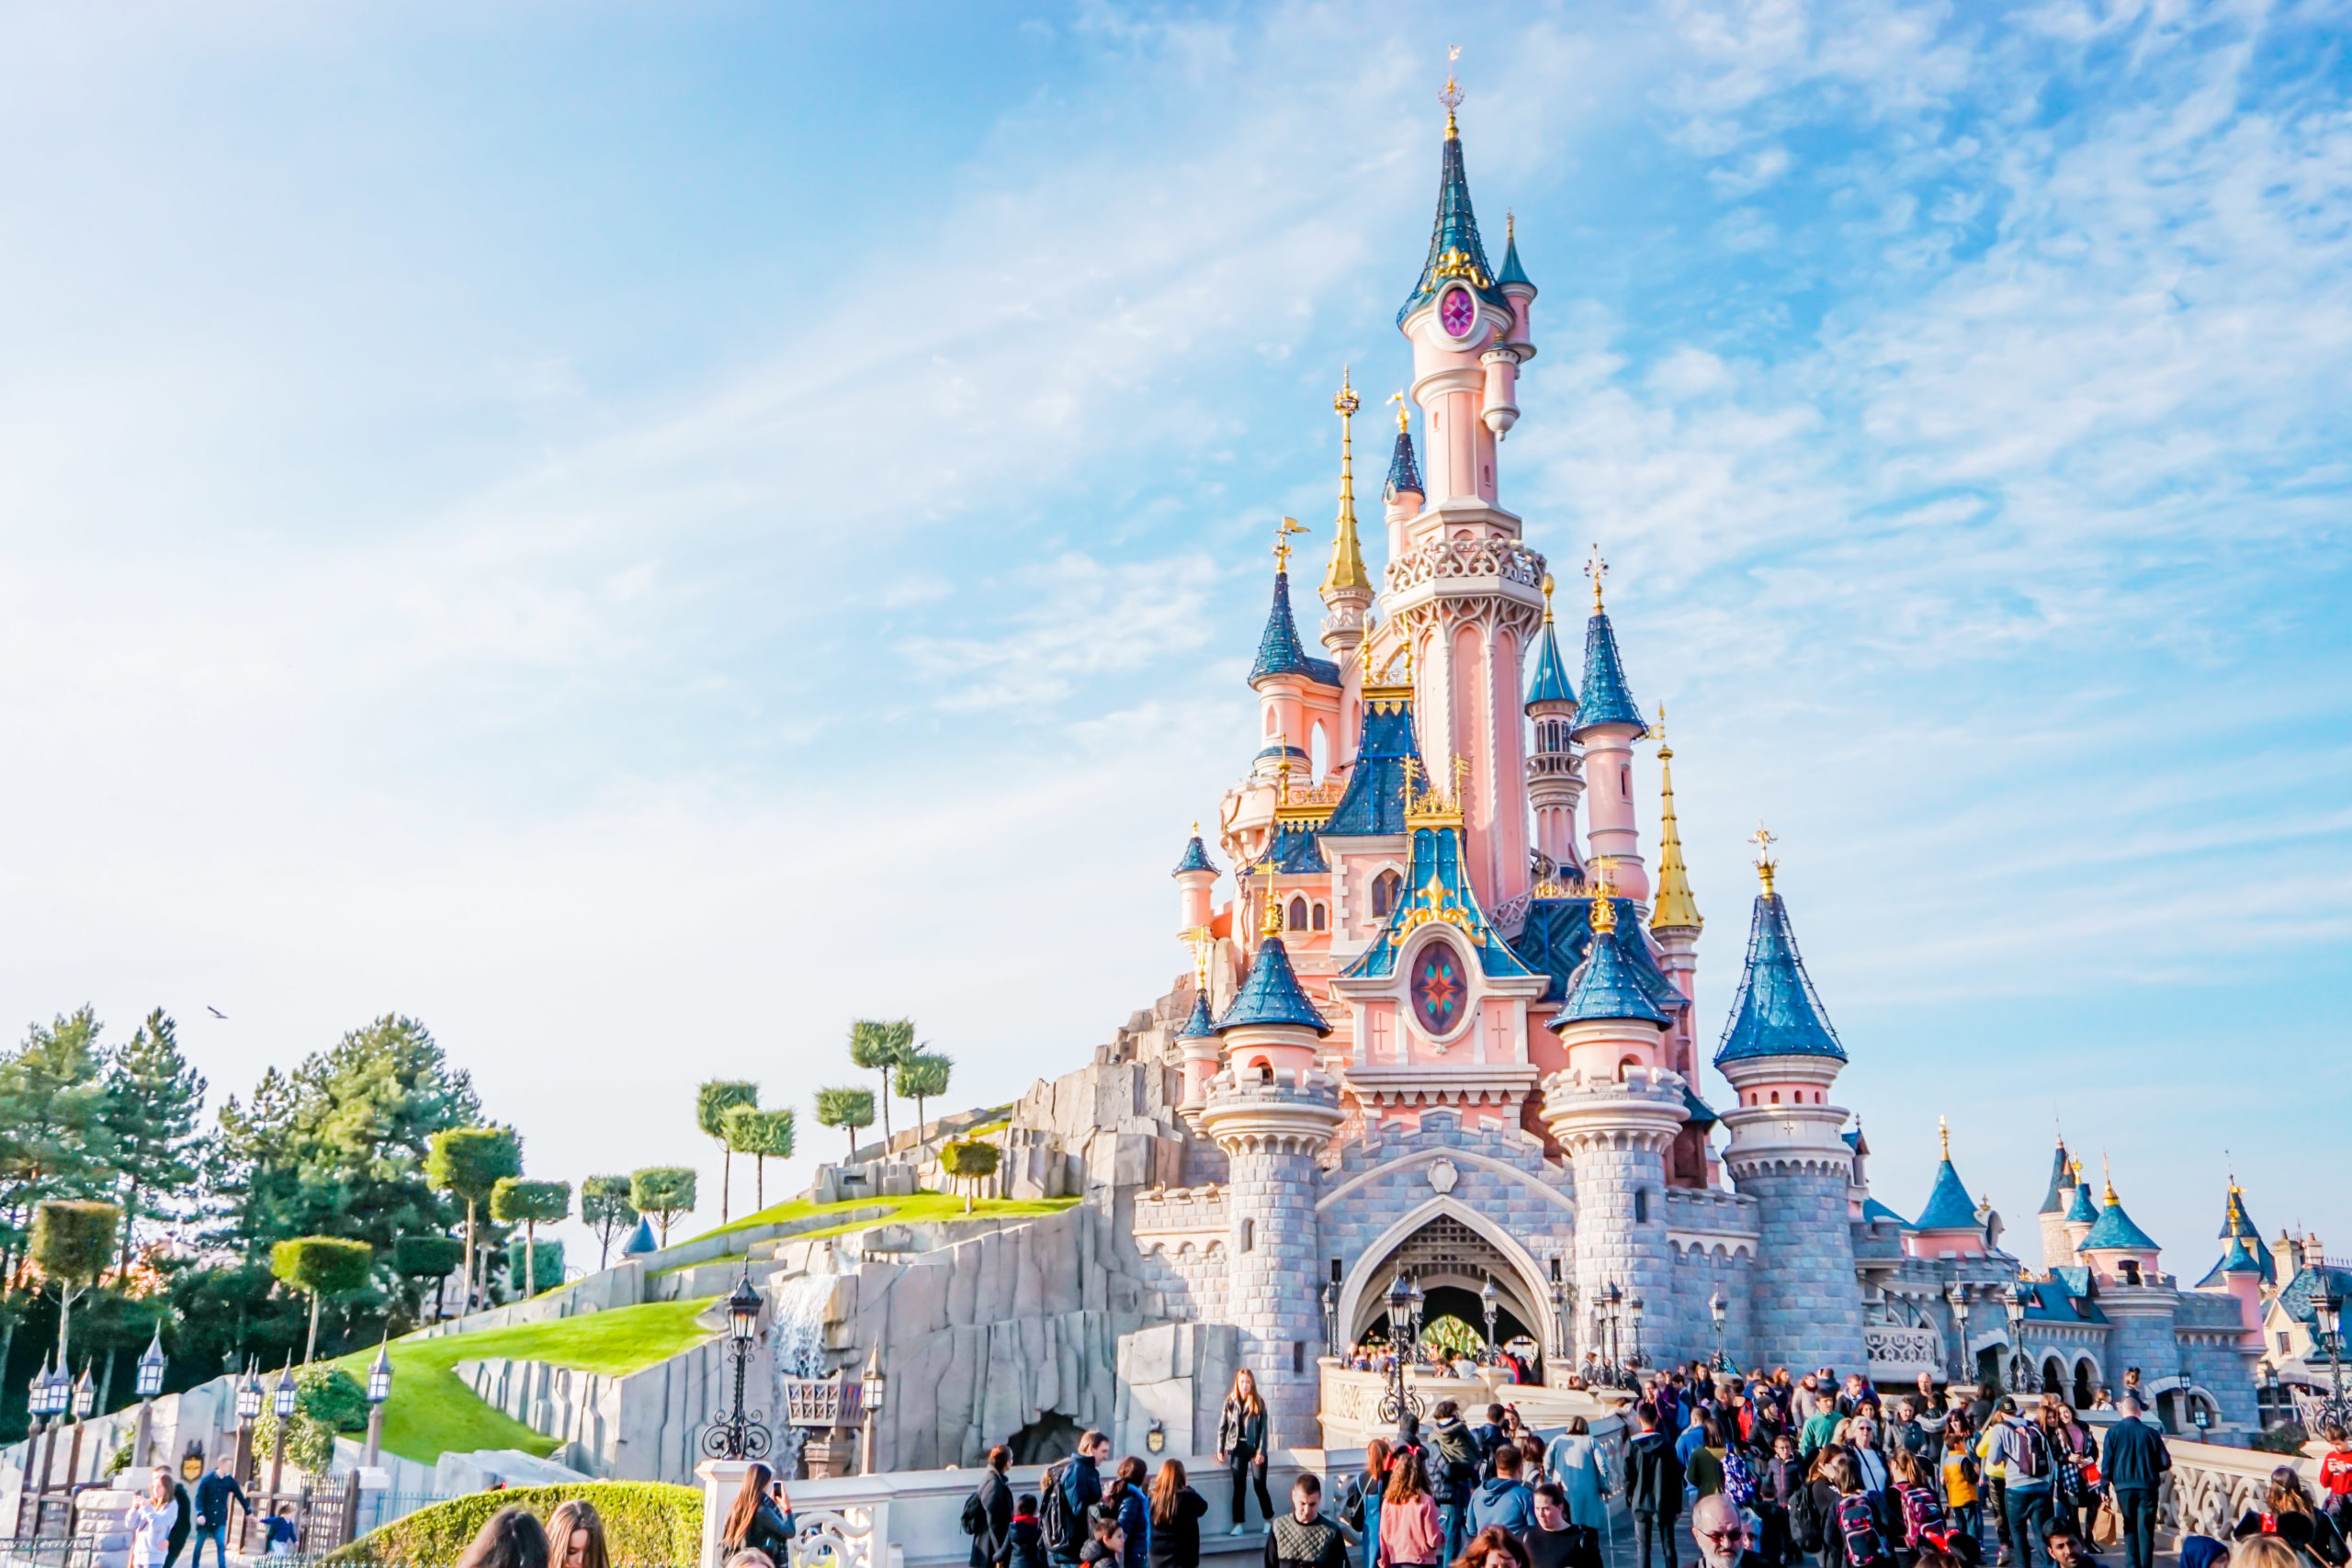 Disneyland Paris - All You Need to Know BEFORE You Go (with Photos)